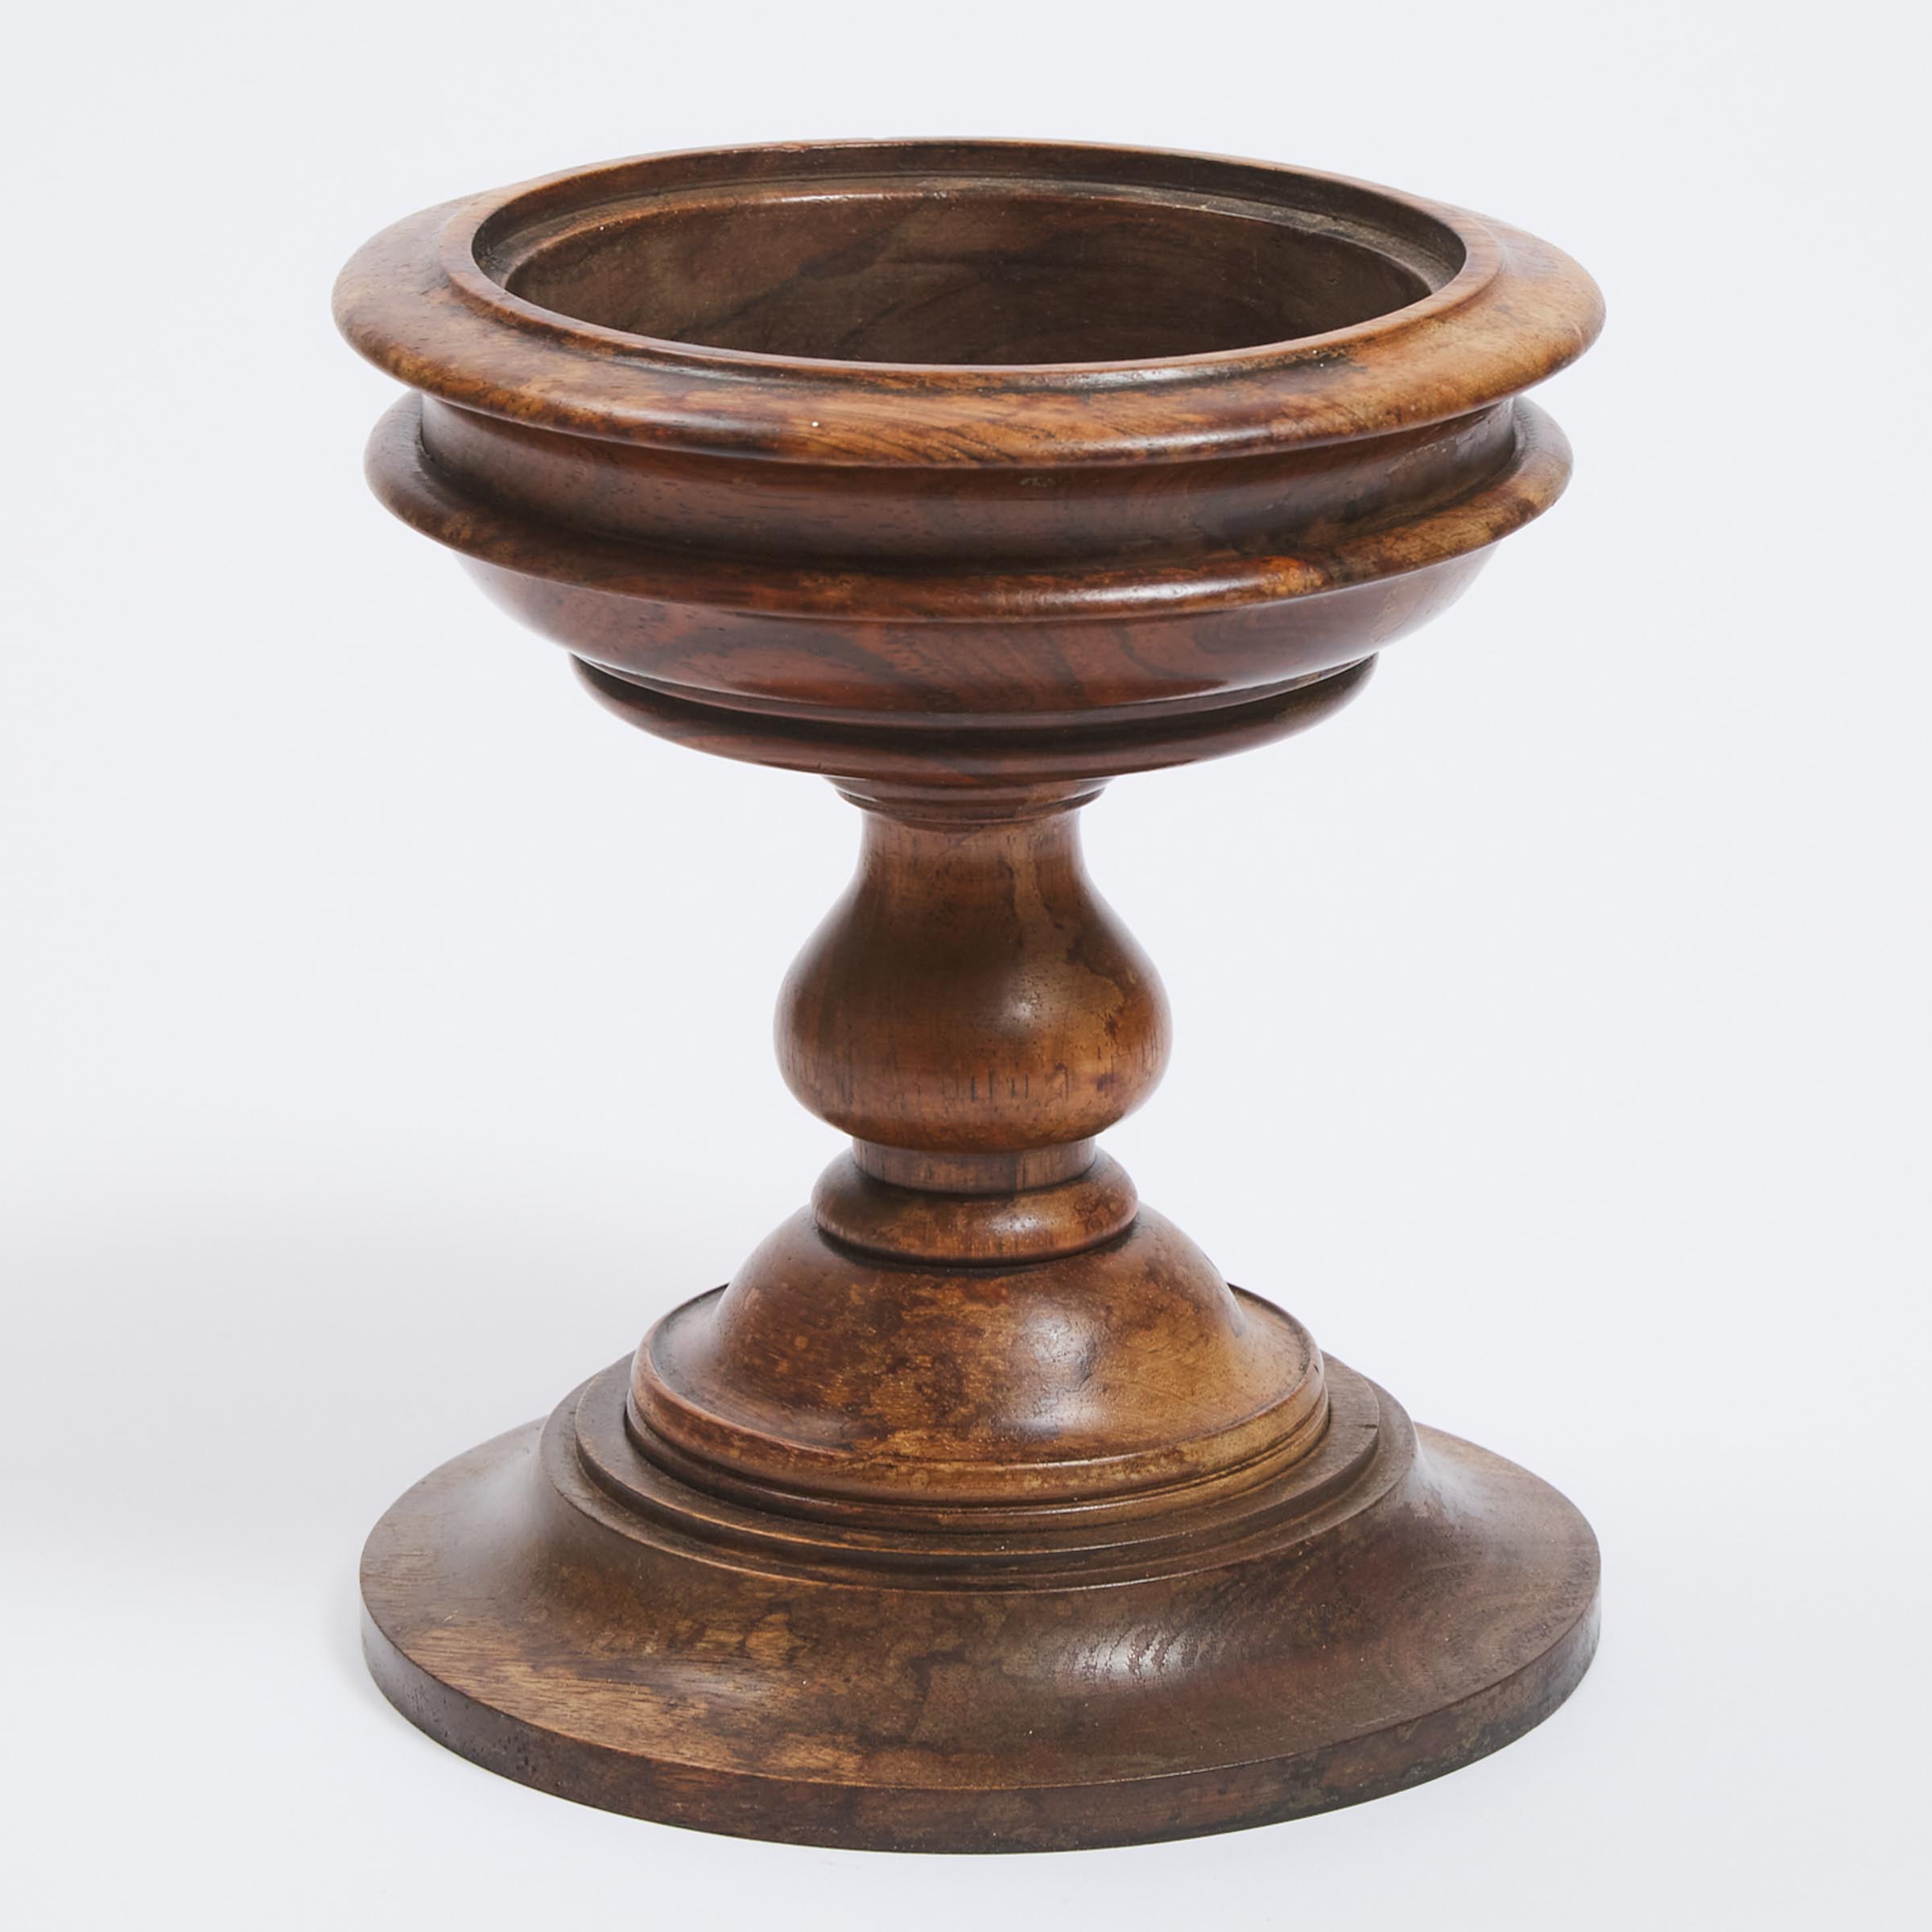 Victorian Turned Rosewood Centre Piece Base, 19th century